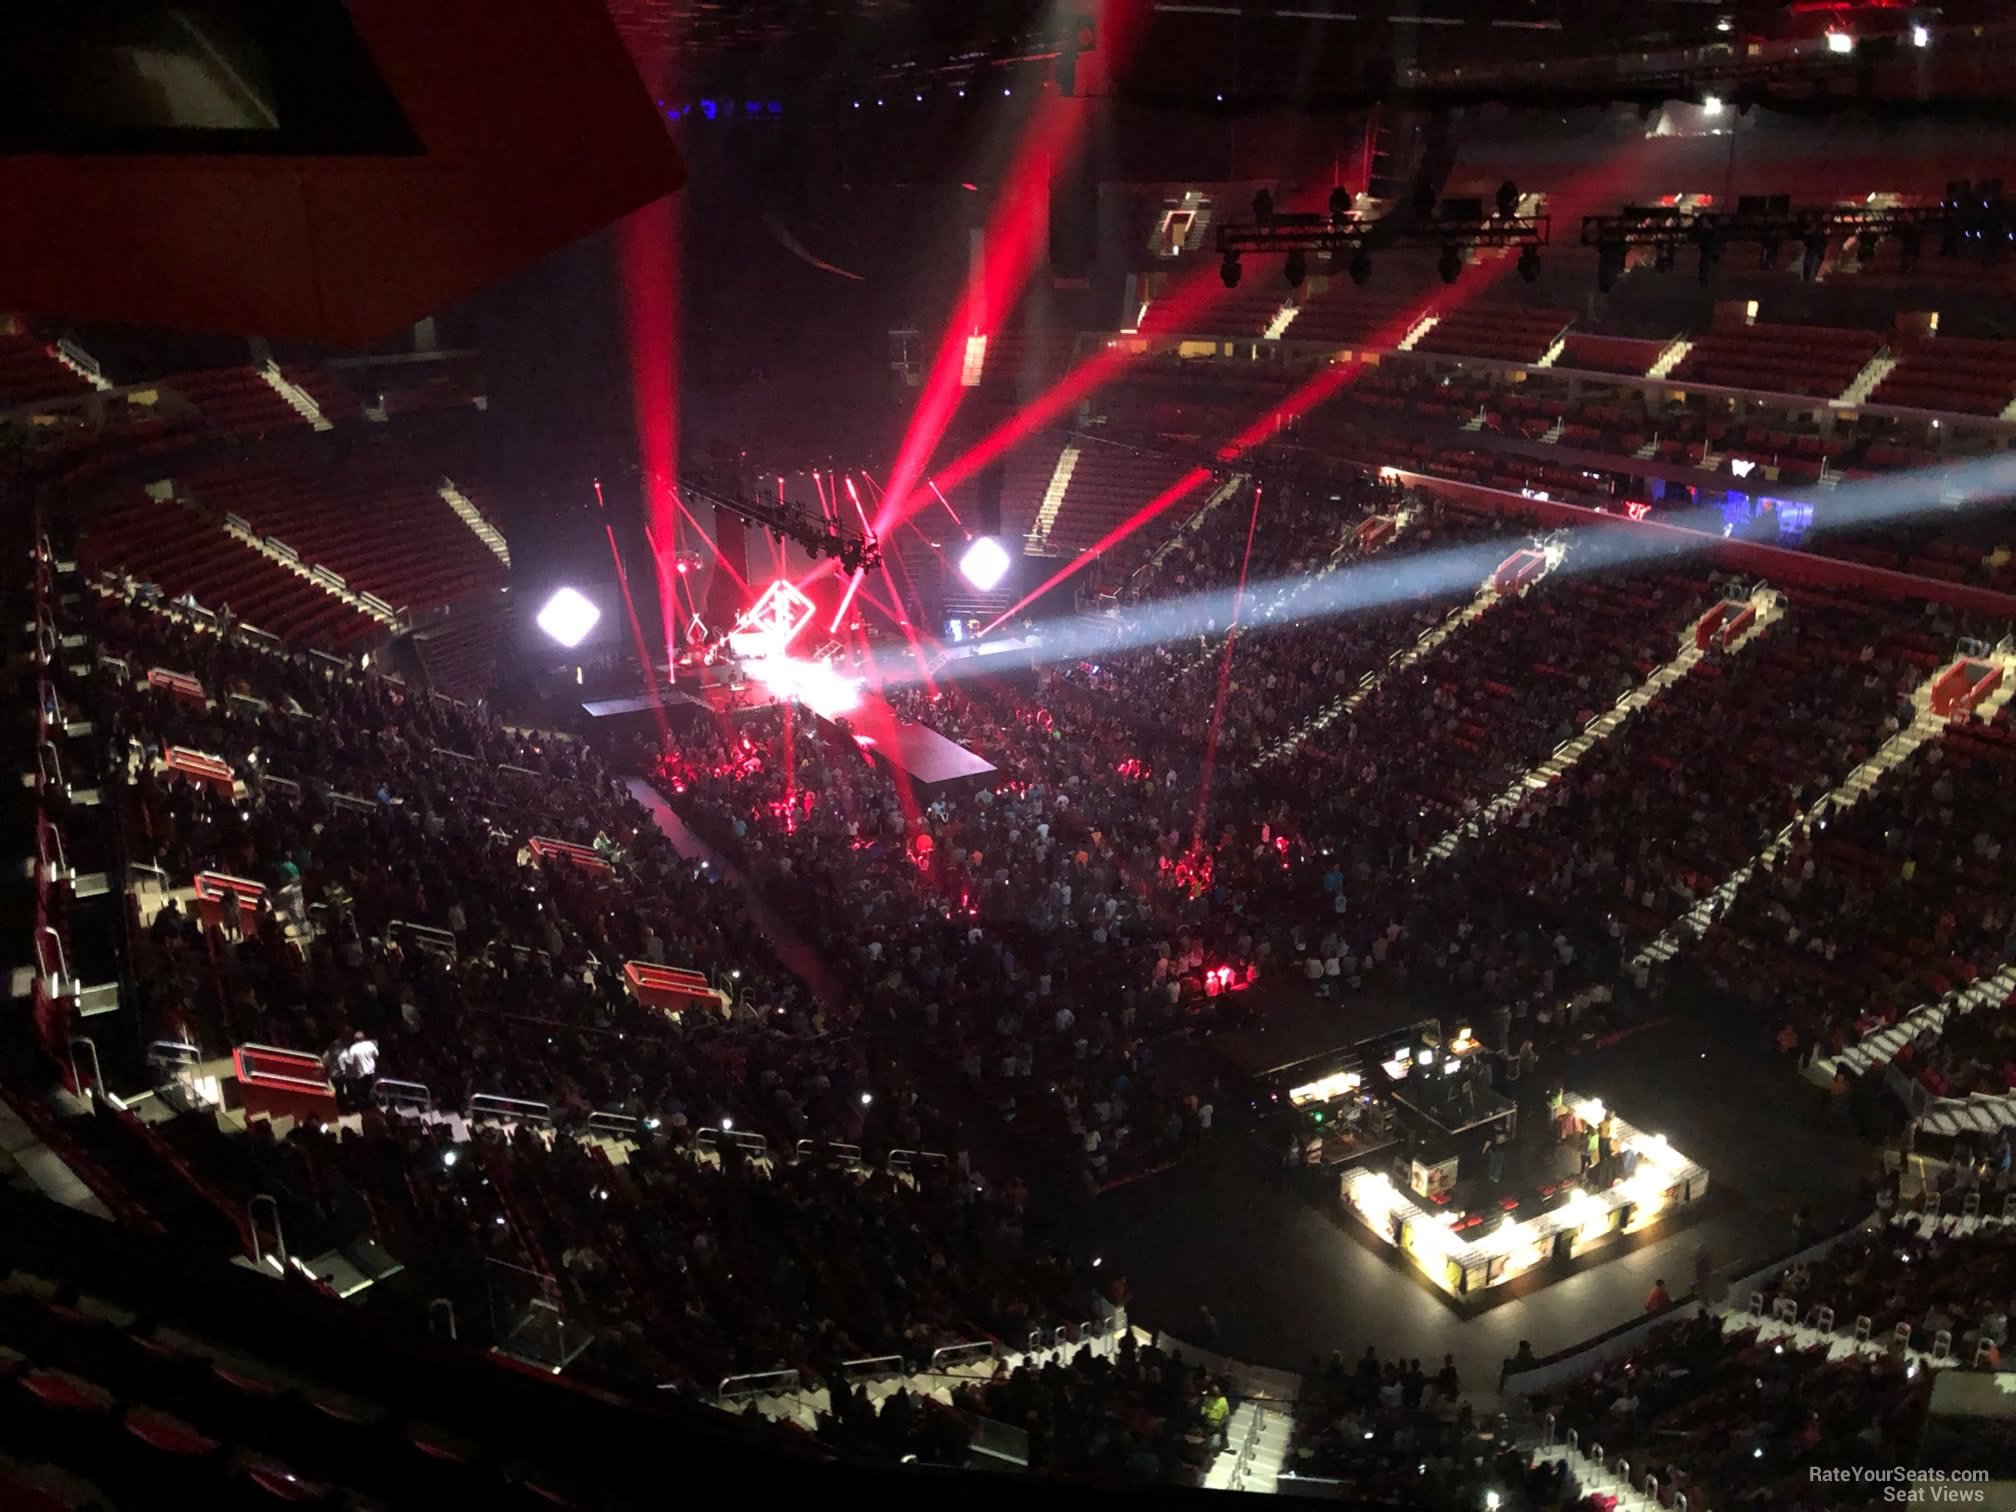 section 221, row 7 seat view  for concert - little caesars arena